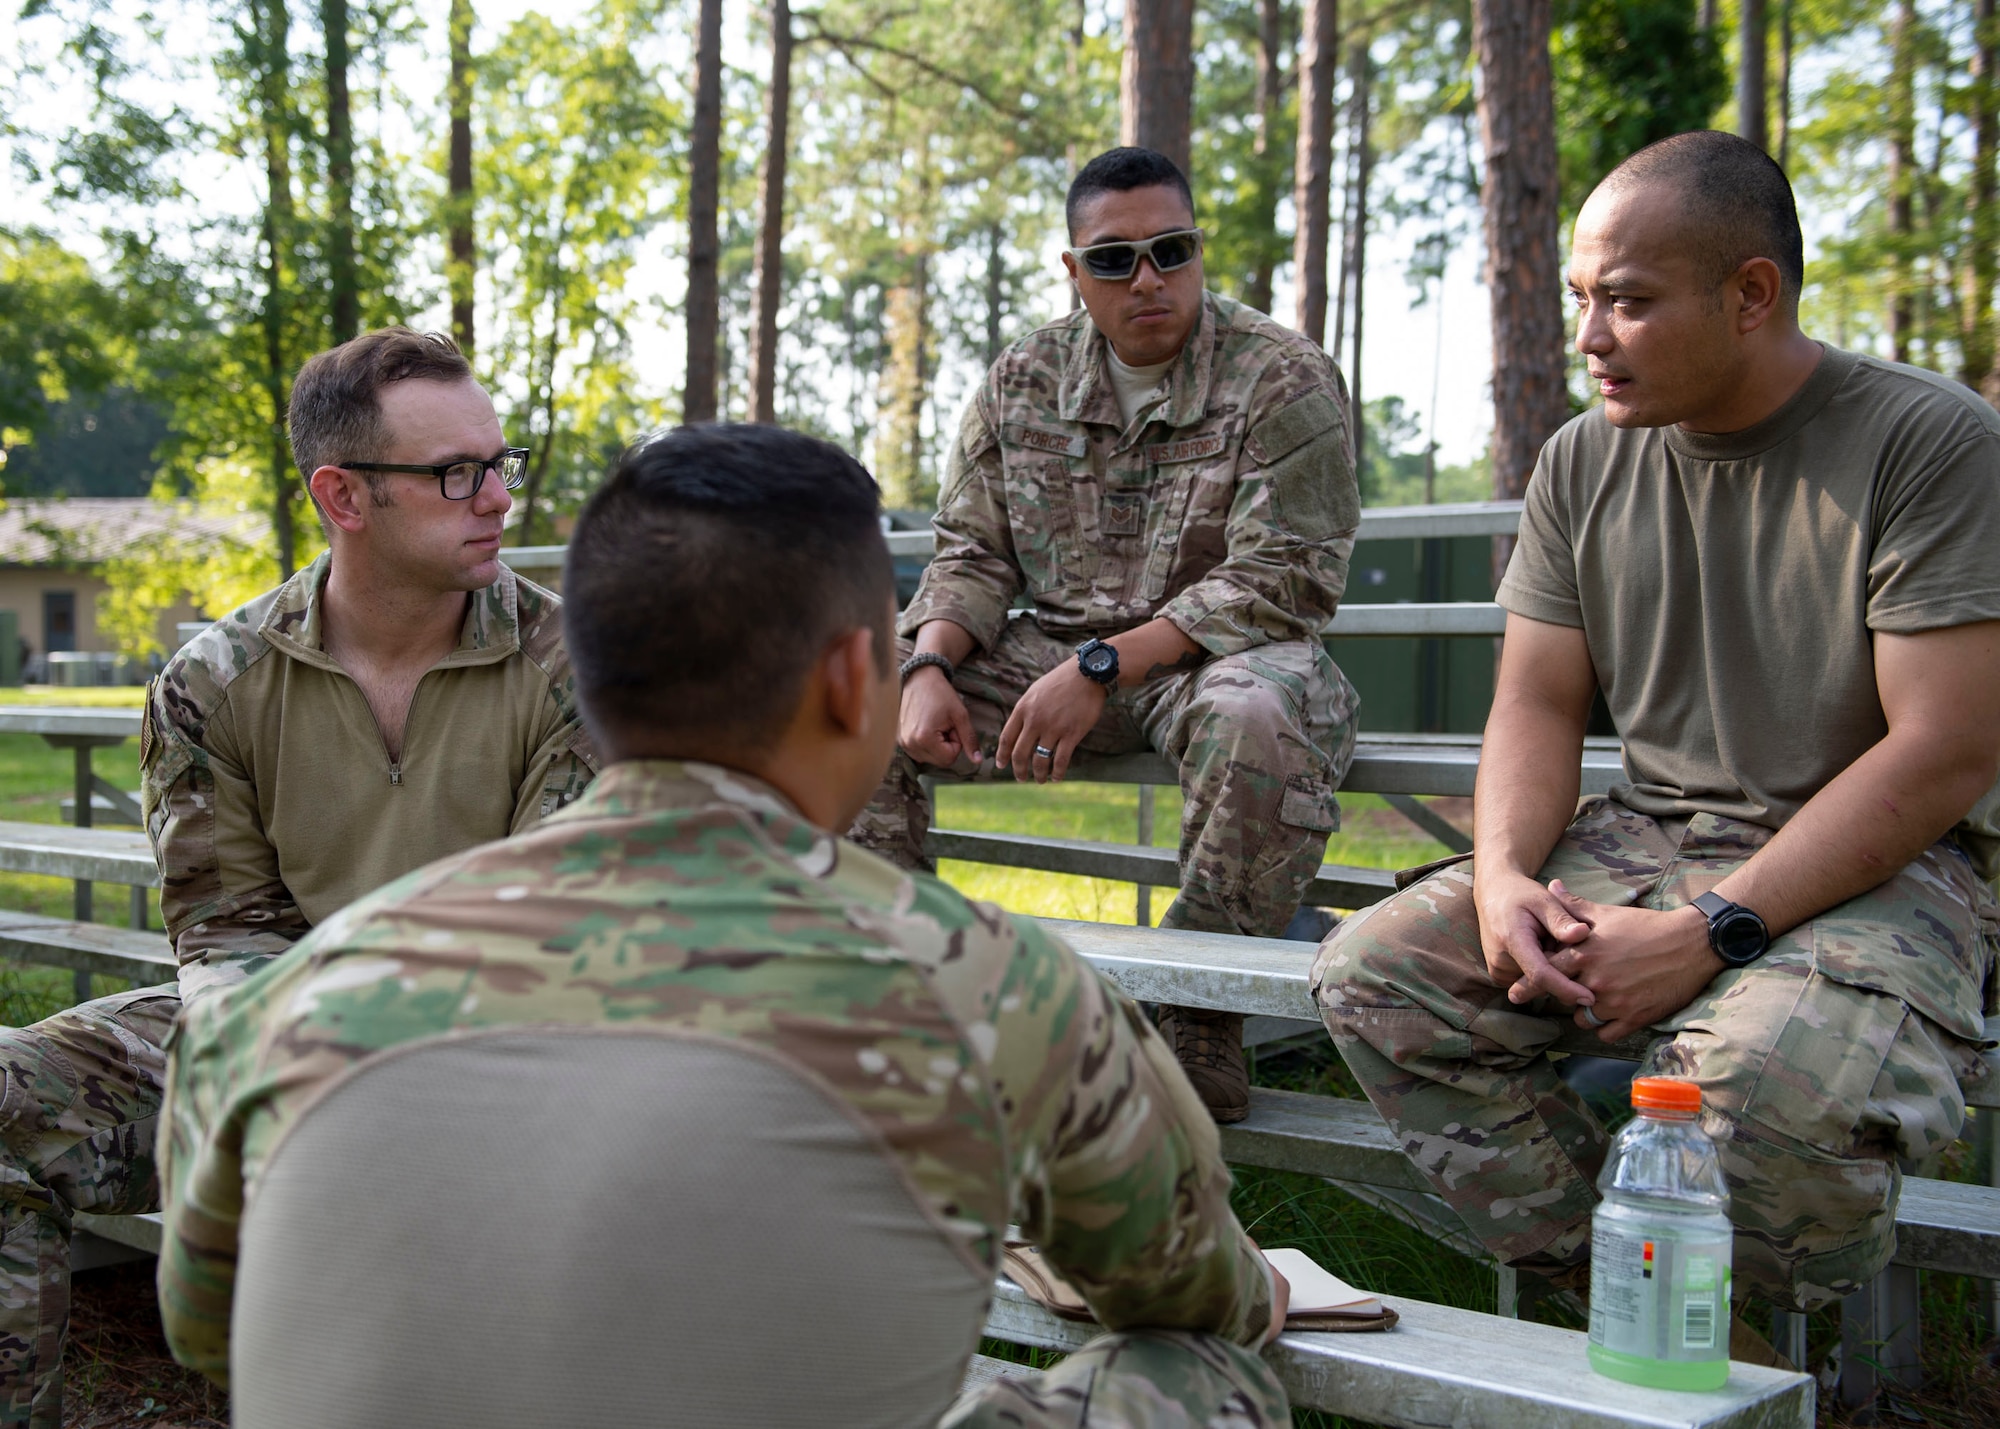 Participants of the Tactical Leaders Course discuss strategy during the course, Aug. 10, 2019, at Moody Air Force Base, Ga. The 7-day course revolved around squad leaders developing their skills to effectively communicate, team build and mission plan. These skills were assessed during a 36-hour simulated operation where squad leaders lead Airmen through tactical situations. (U.S. Air Force photo by Airman Azaria E. Foster)